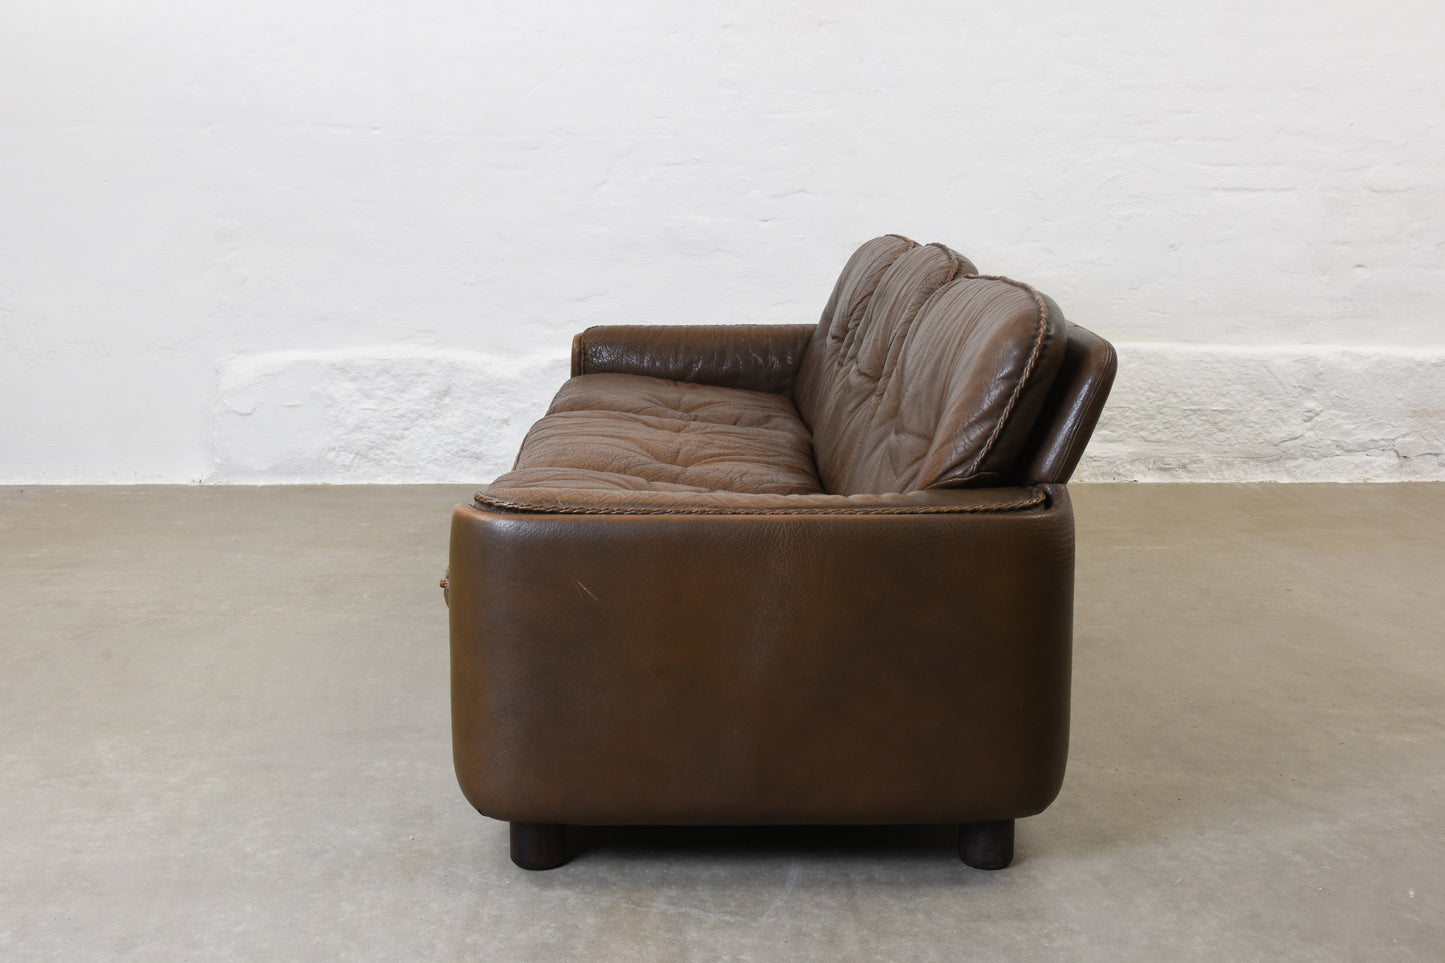 1970s leather three seater by Vatne Möbler